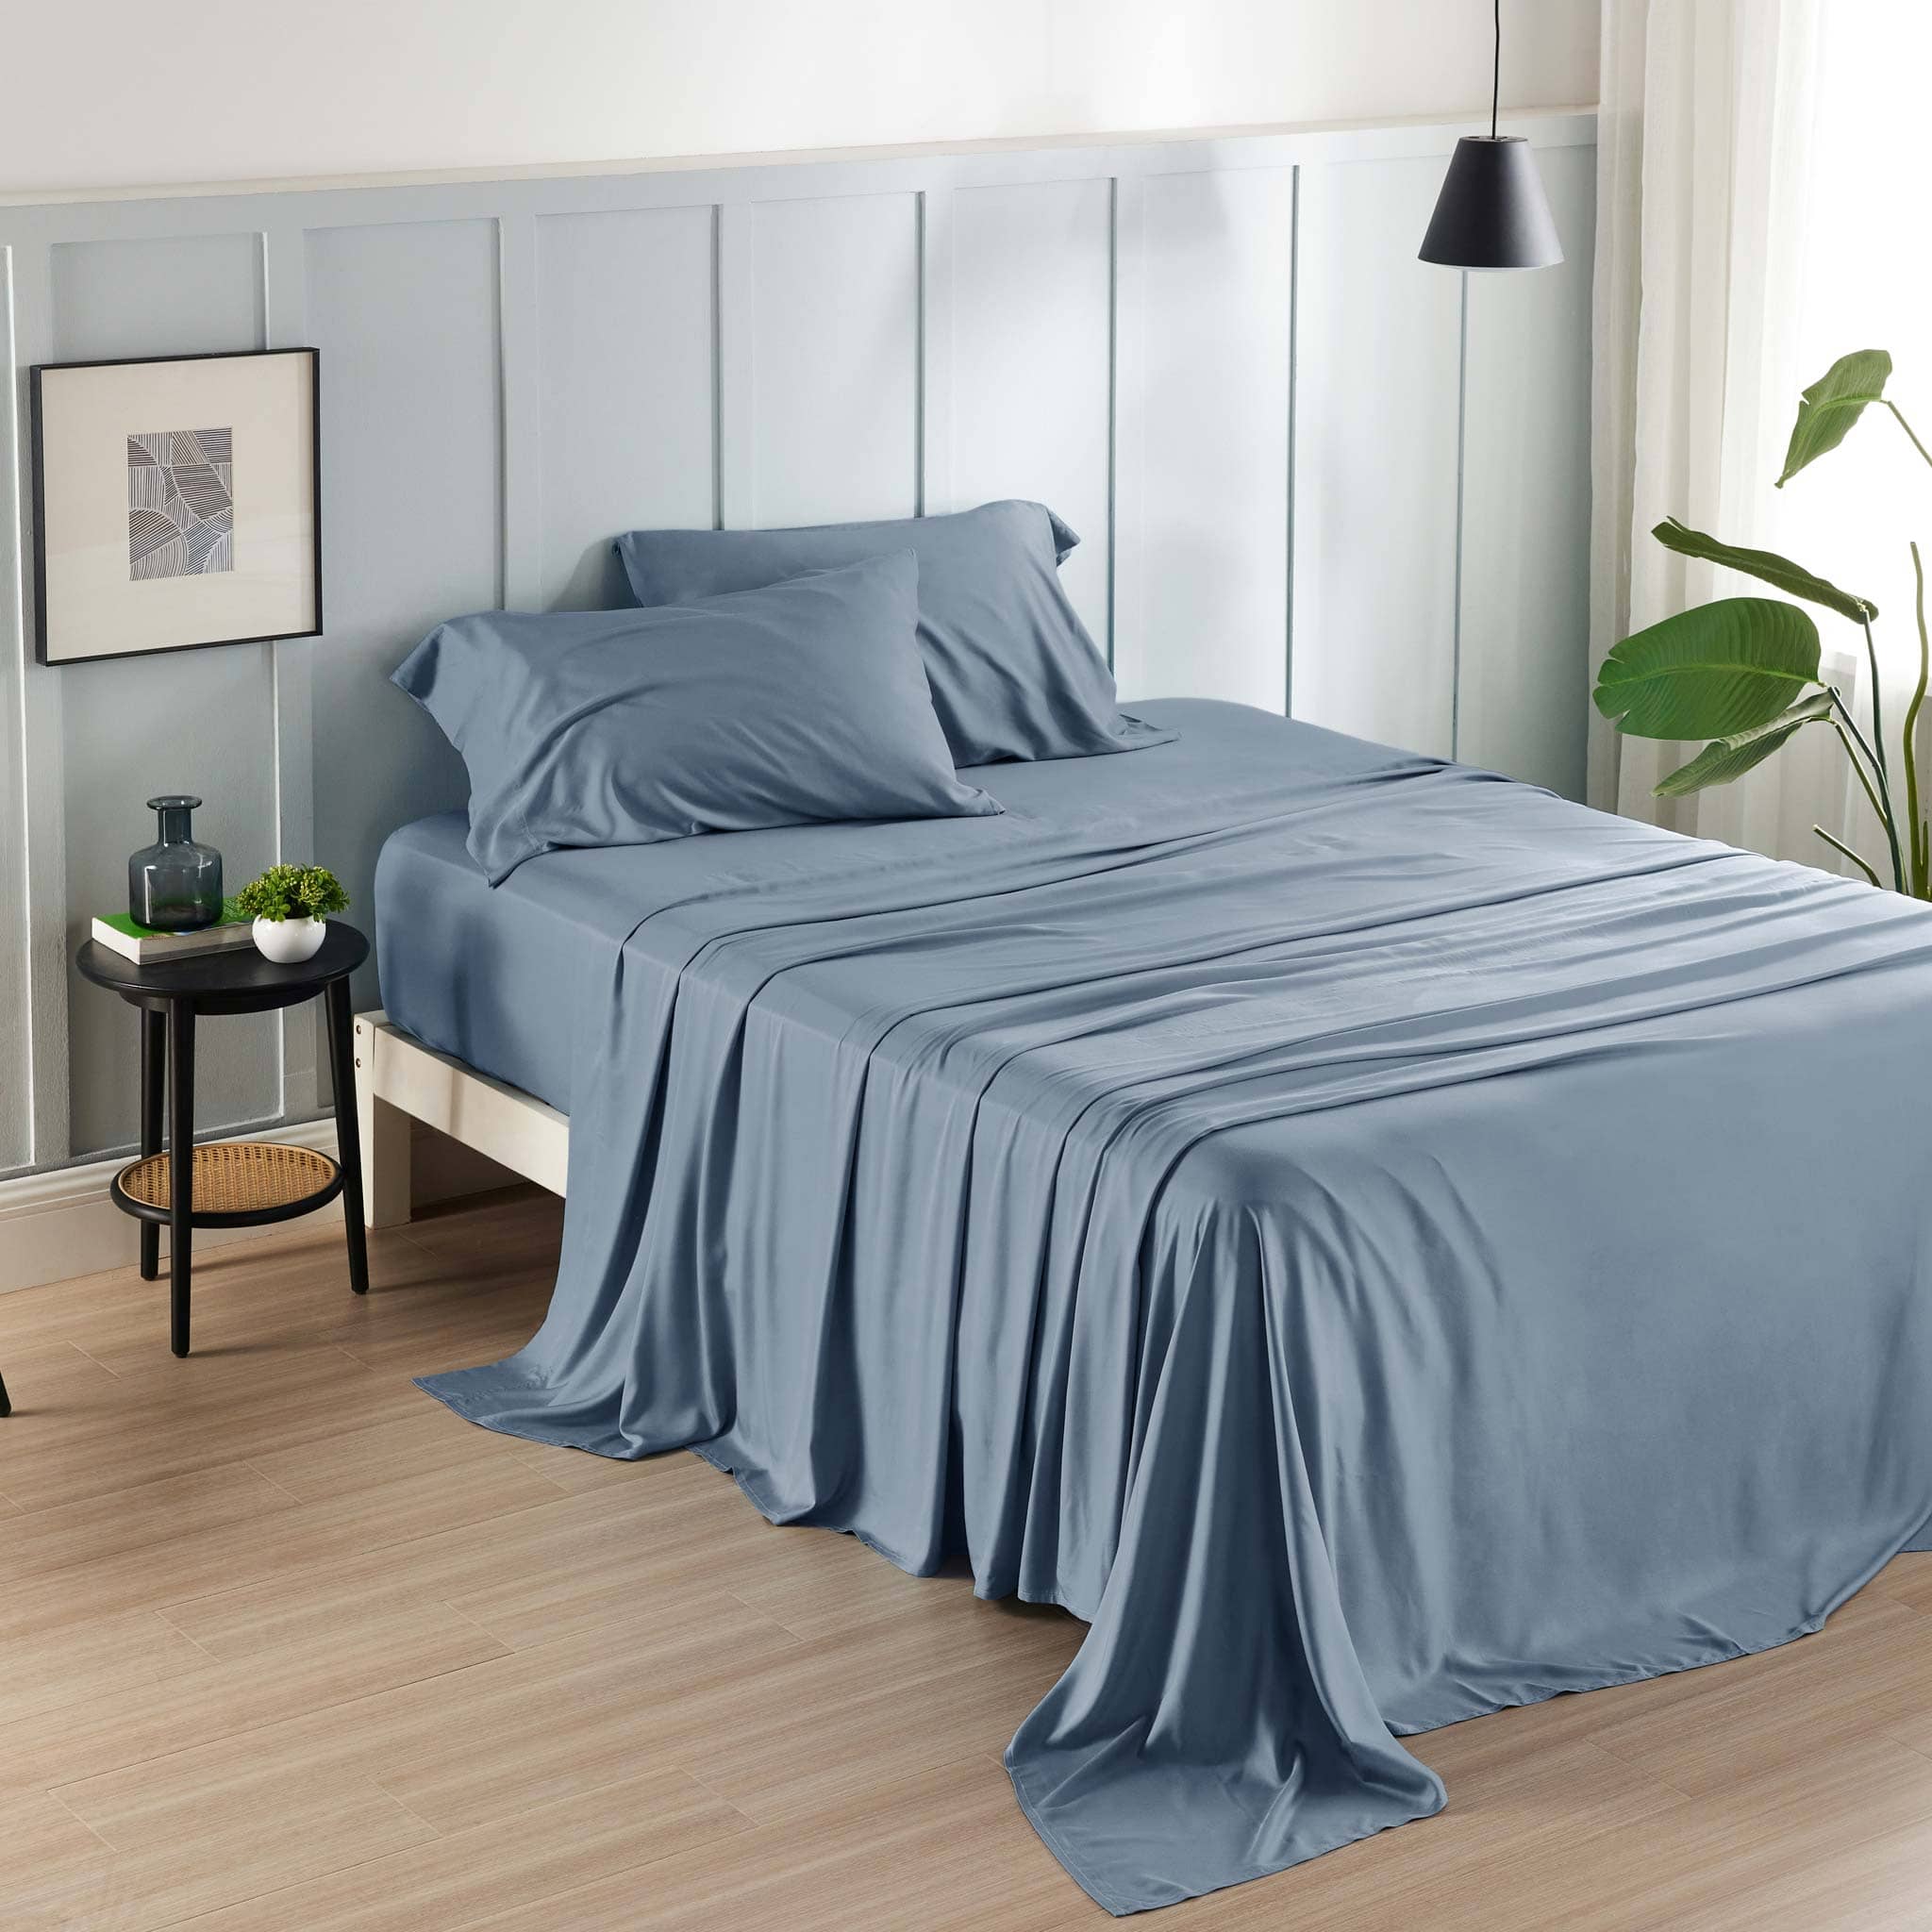 Bedsure Queen Sheets, Rayon Derived from Bamboo, Queen Cooling Sheet Set,  Deep Pocket Up to 16, Bre…See more Bedsure Queen Sheets, Rayon Derived  from